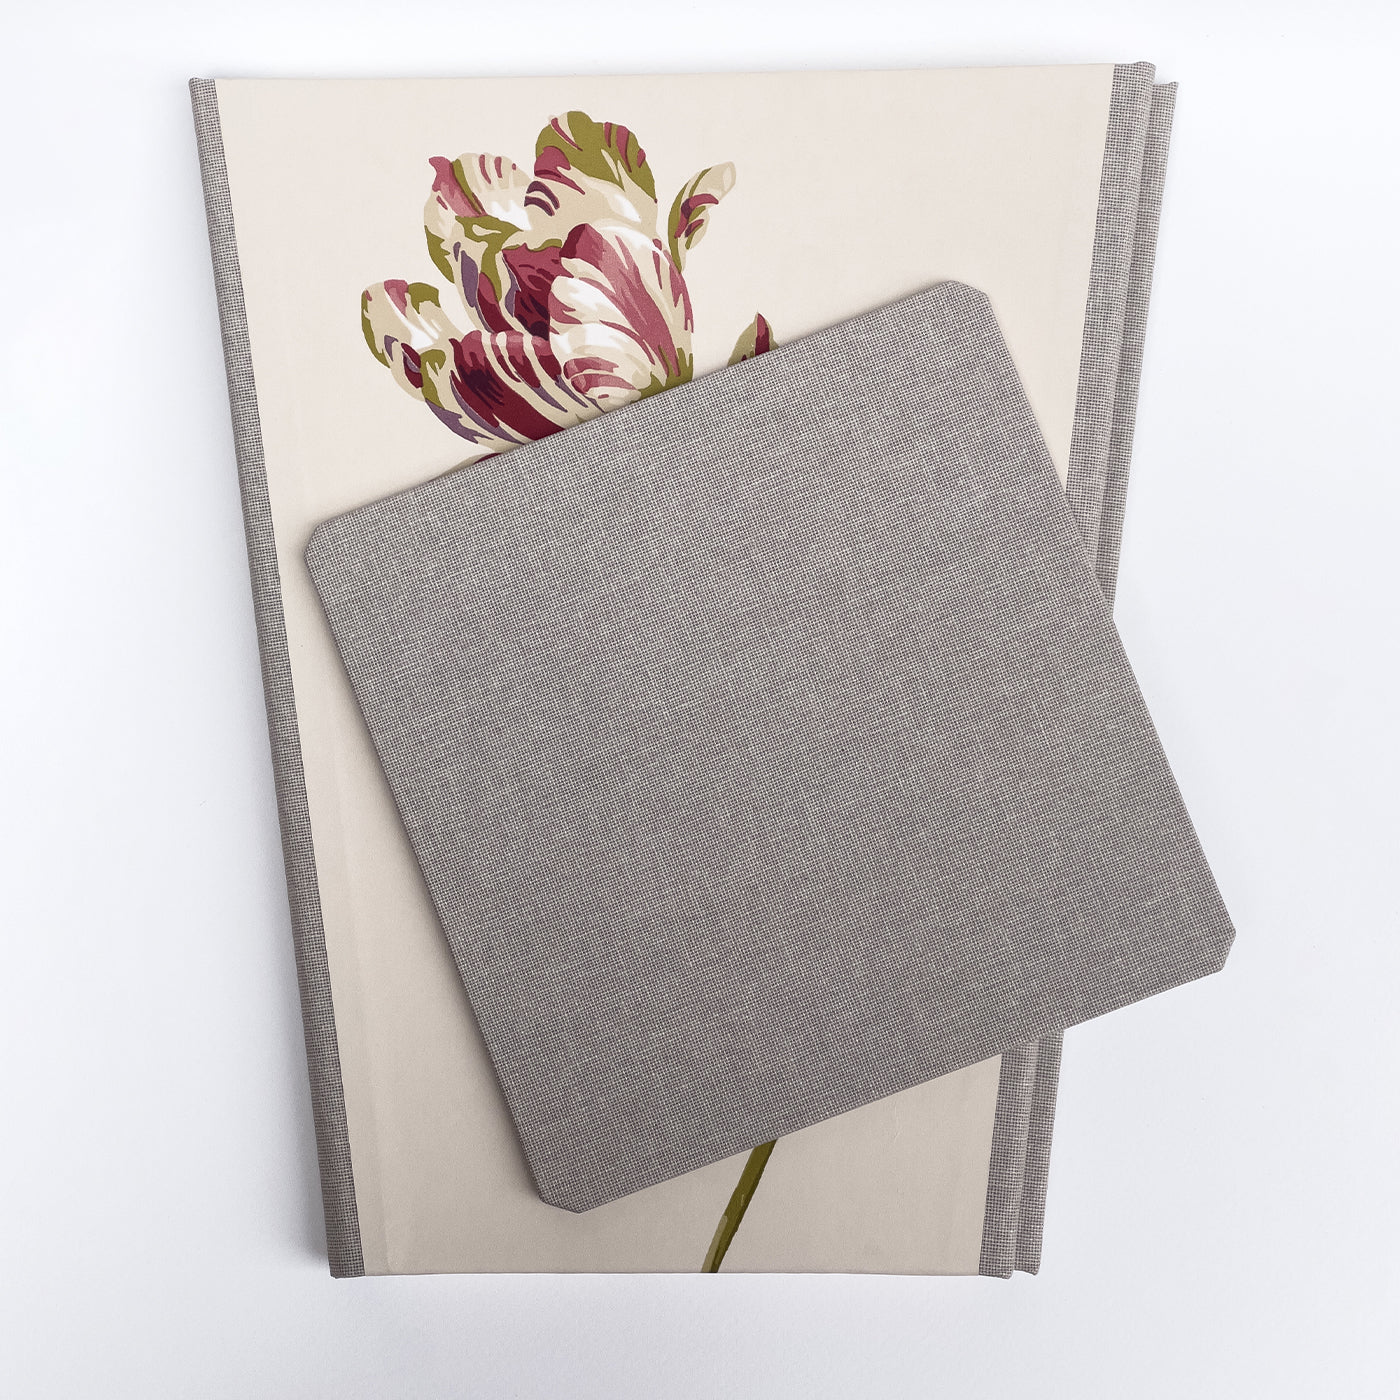 Floral Beige & Taupe Foldable Paper Bin - Alternative view 2